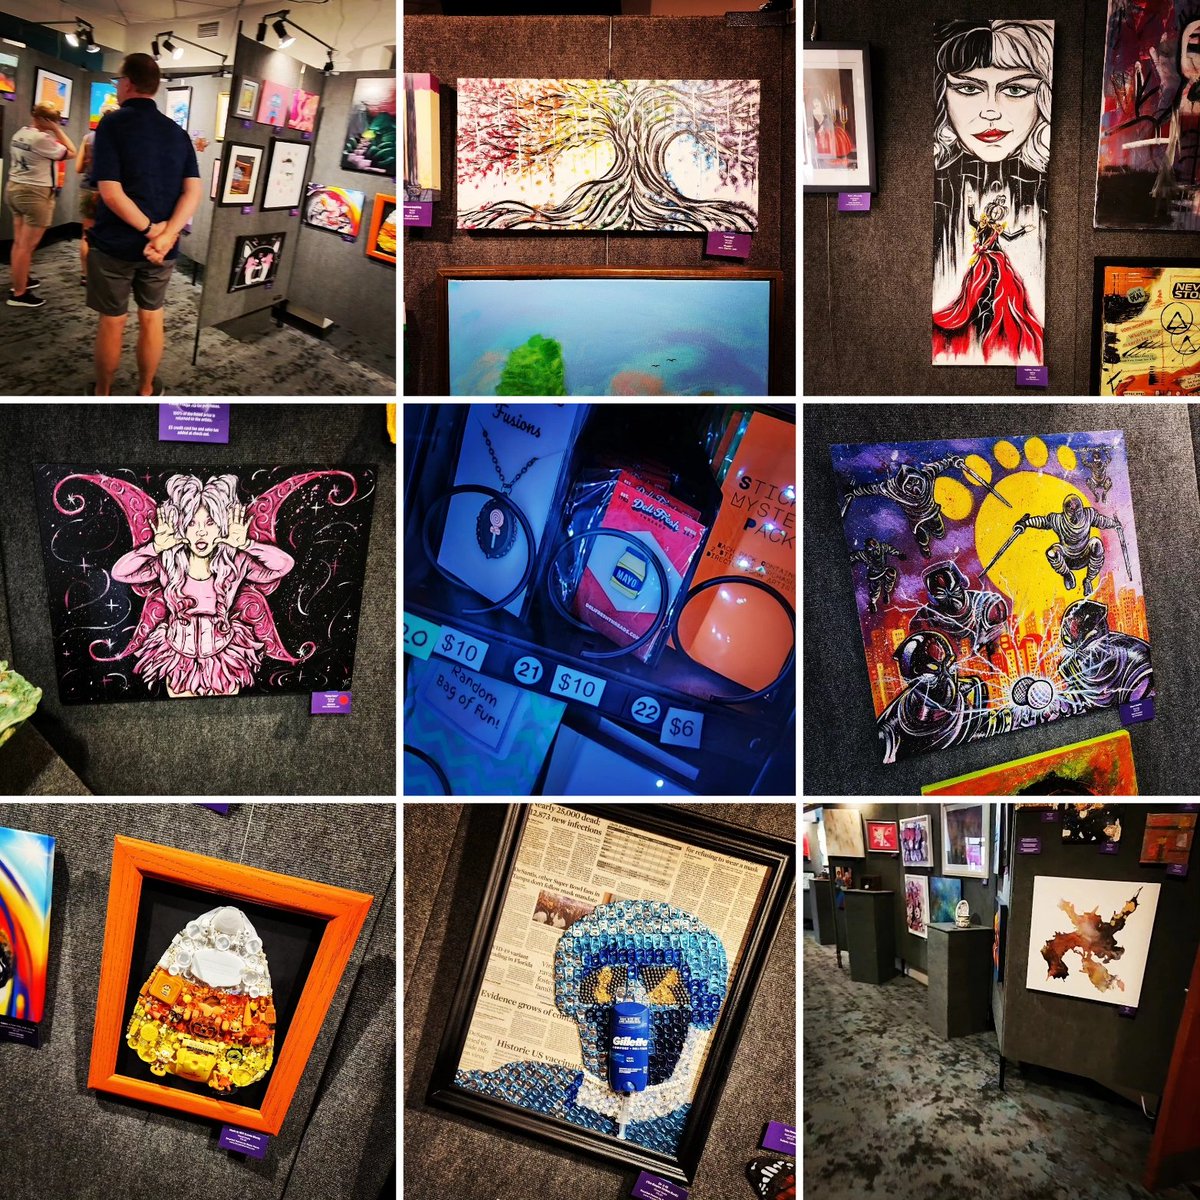 @visualfringe is in full swing in Orlando! Make sure to find some time this week and check out all the amazing work from talented #localartists .

#JBauerart #art #artist #create #paintings #visualfringe #orlandofringe #fringe #Orlando #supportlocalartist